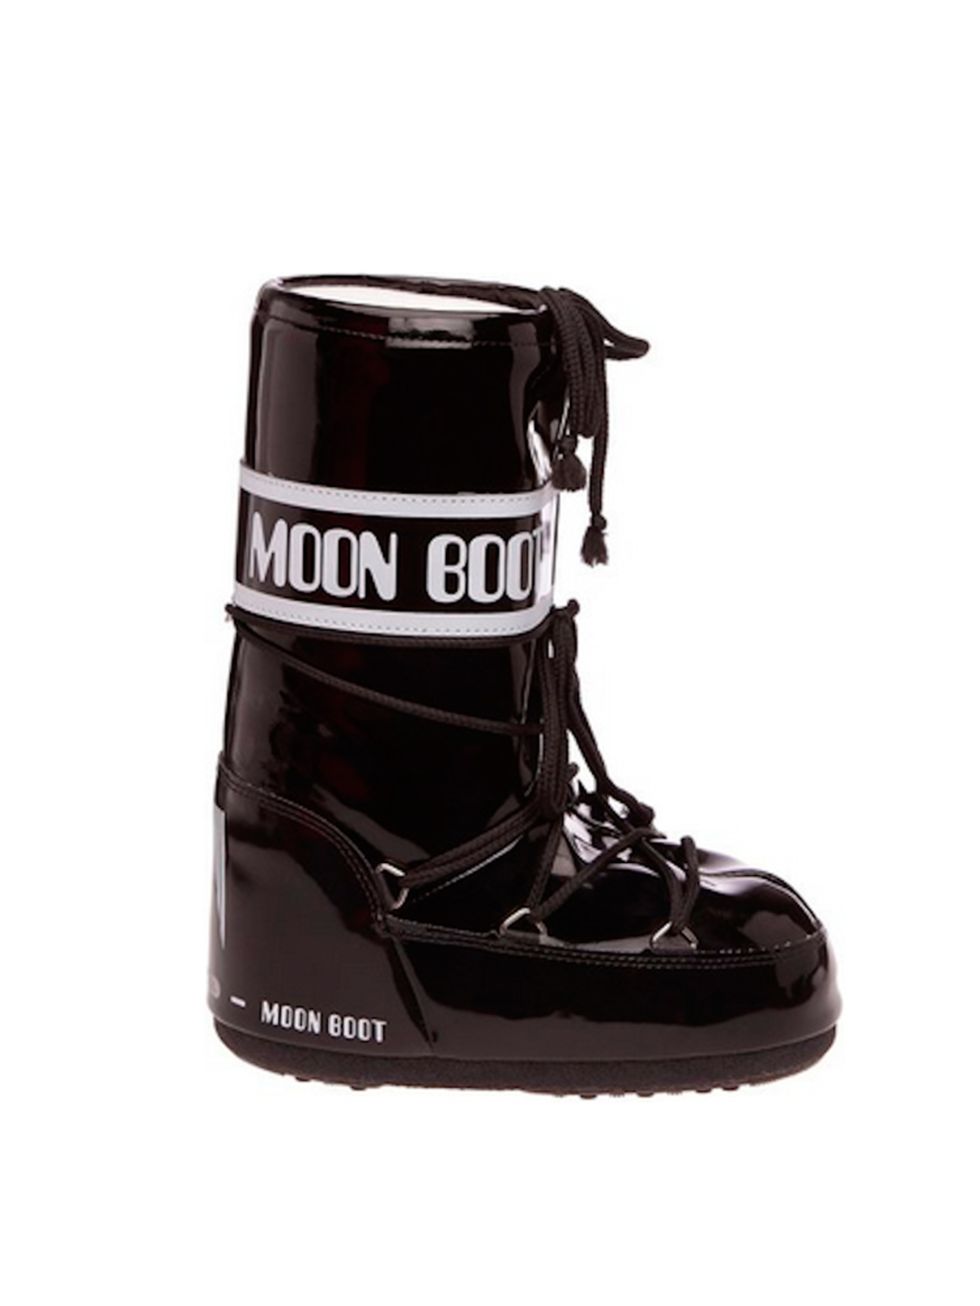 <p>Moon Boots, £55 at <a href="http://www.amazon.co.uk/Moon-Boot-Unisex-Adult-14009700-Bianco/dp/B004CNWRGG/ref=sr_1_7?s=shoes&ie=UTF8&qid=1427196755&sr=1-7&keywords=moon+boots" target="_blank">amazon.co.uk </a></p>